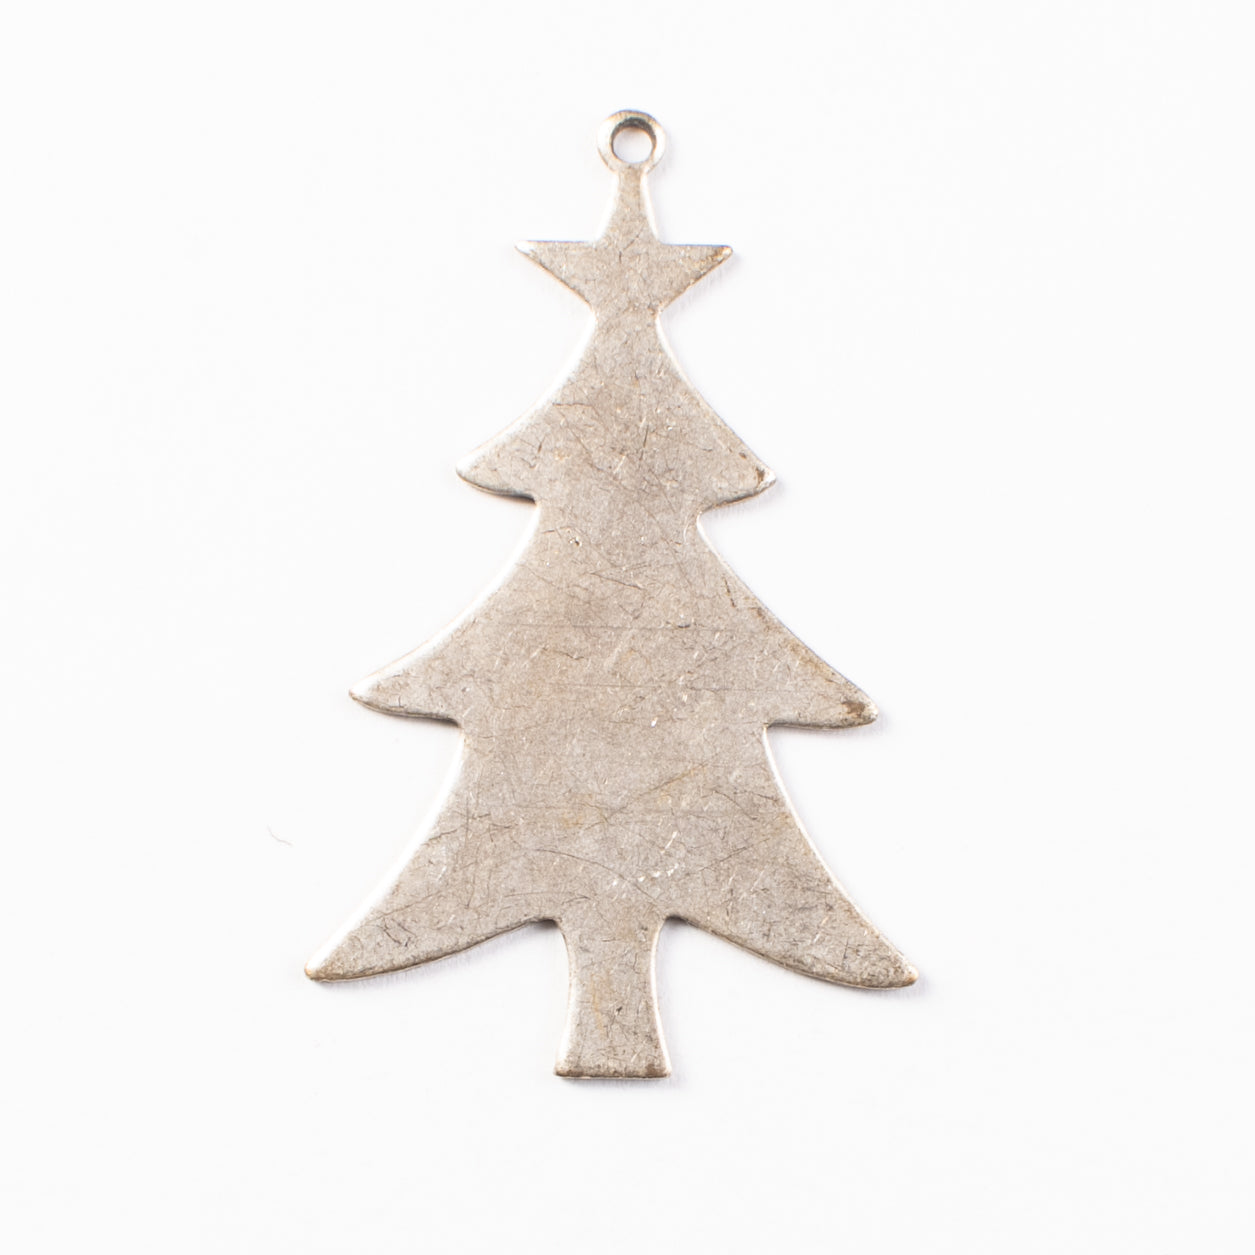 45mm CHRISTMAS TREE Silhouette Charm, Antique Silver, 6 pack